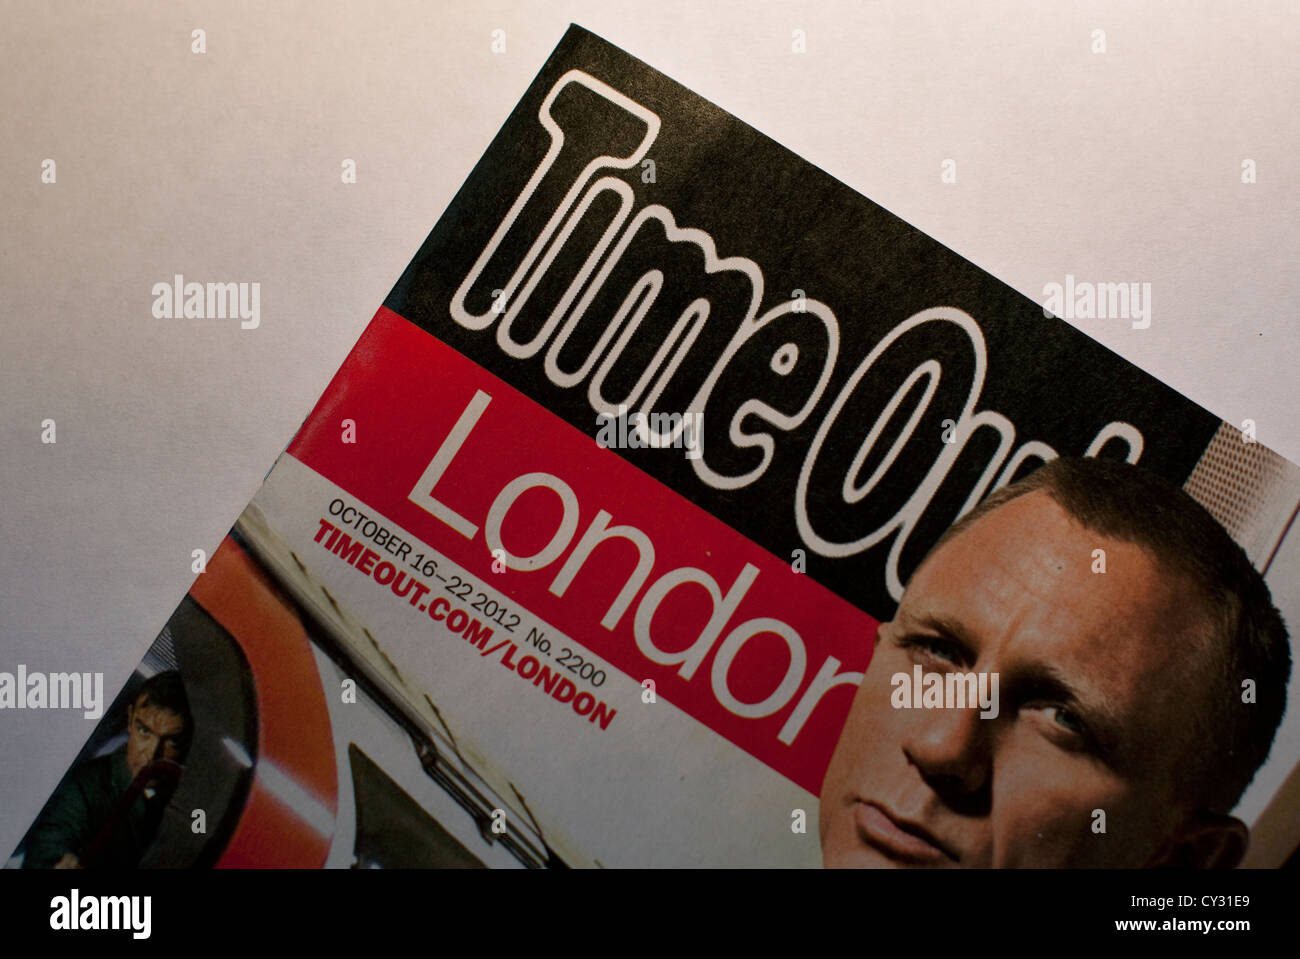 New free edition of Time Out magazine, London Stock Photo